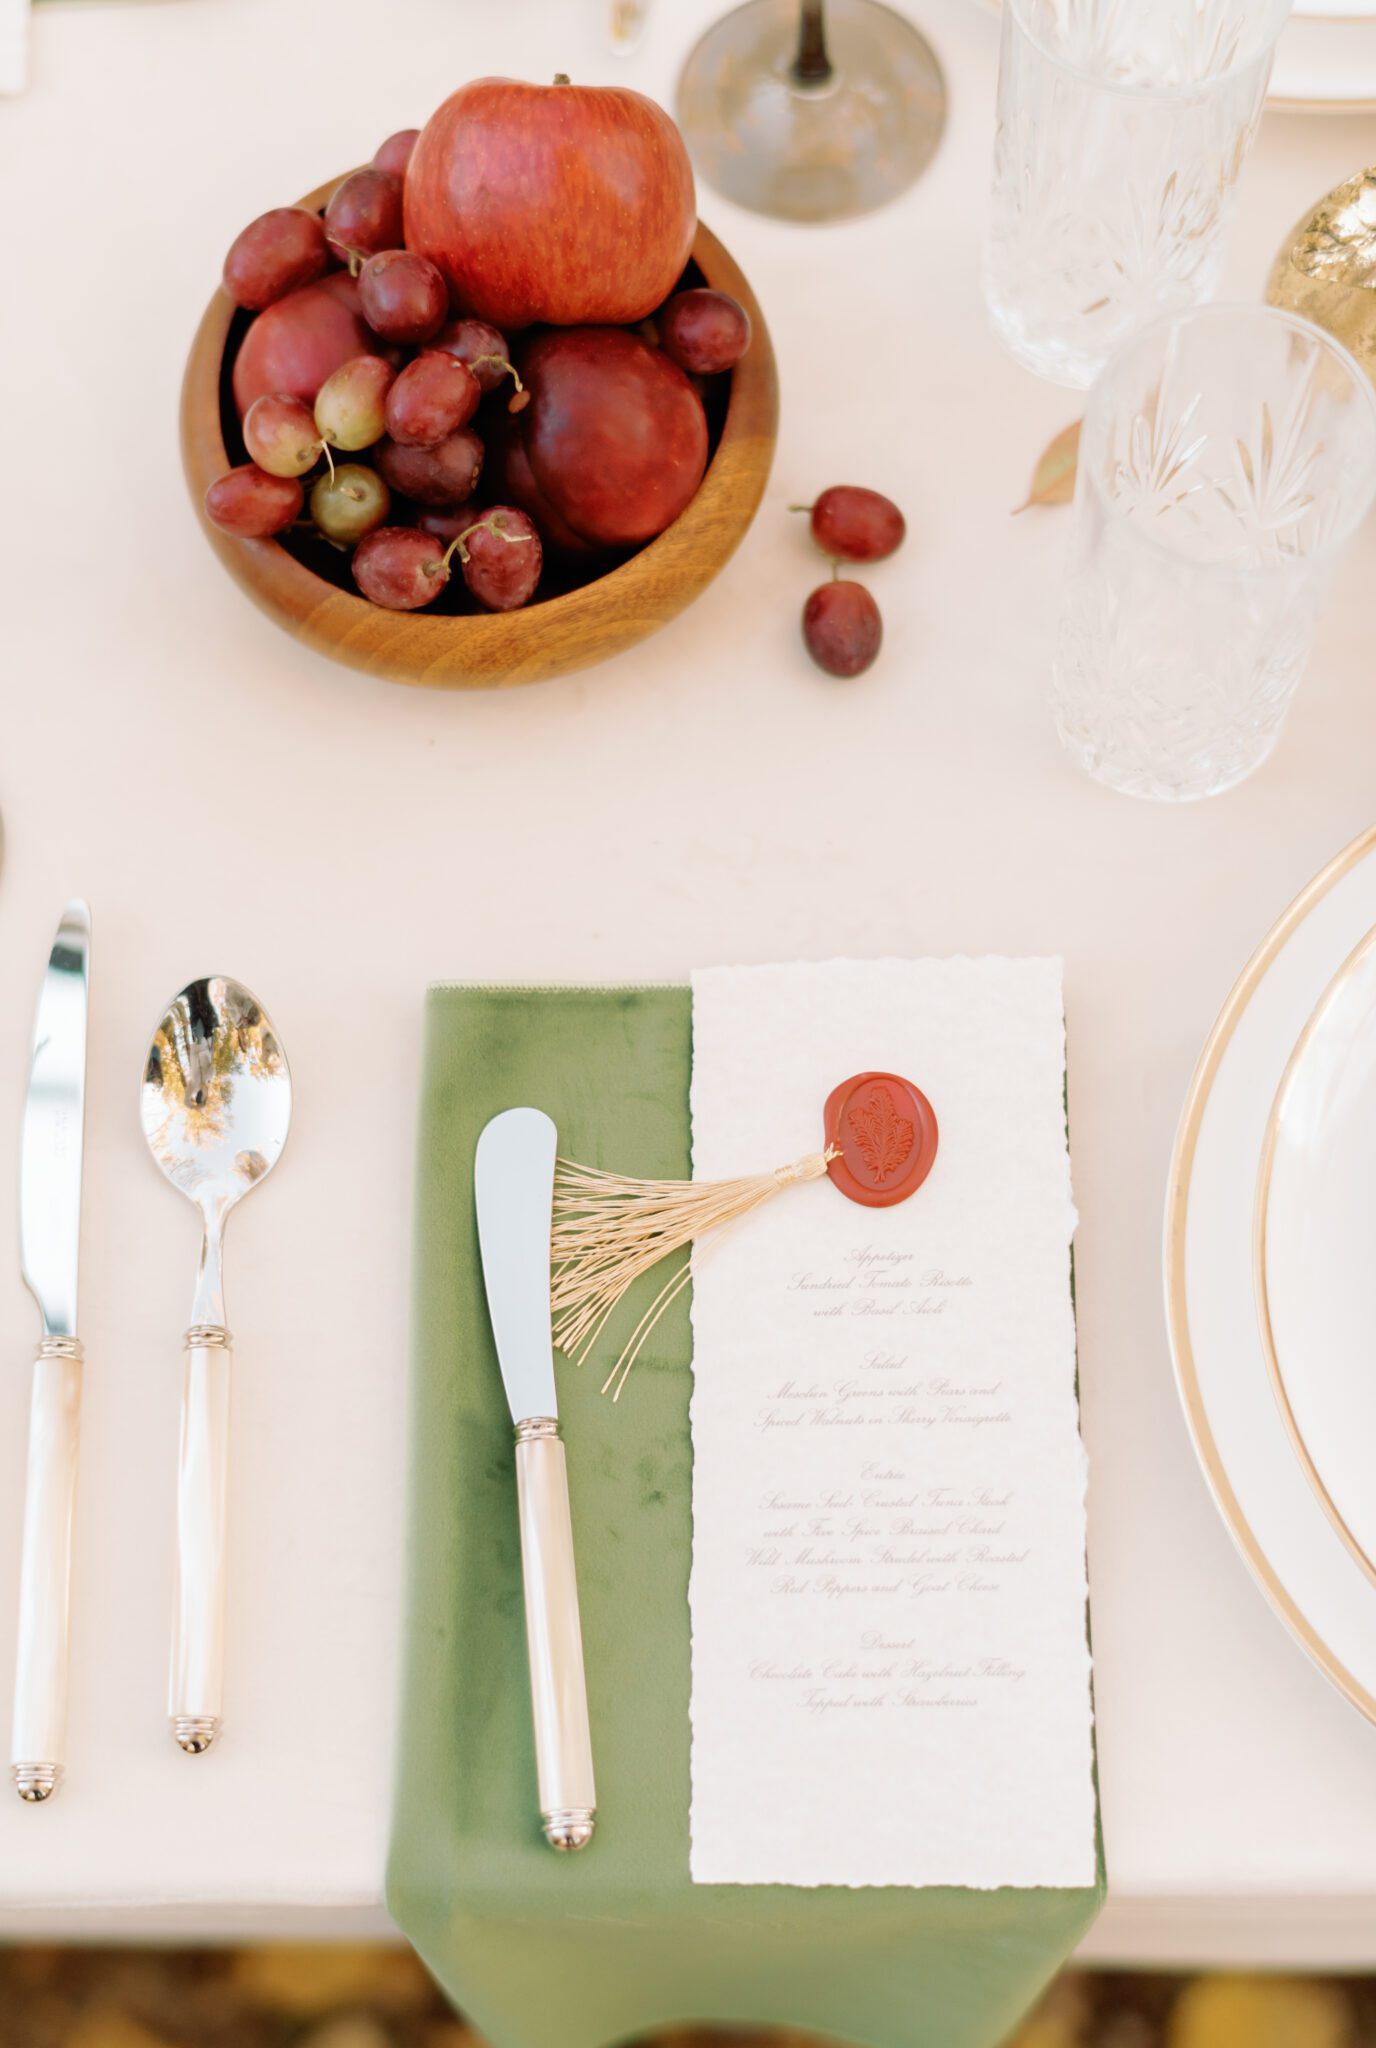 Al fresco dining at golden hour. Wedding reception tablescape featuring olive green, burgundy and rust details, elegant menus with crimson wax seals and gold tassel accents.